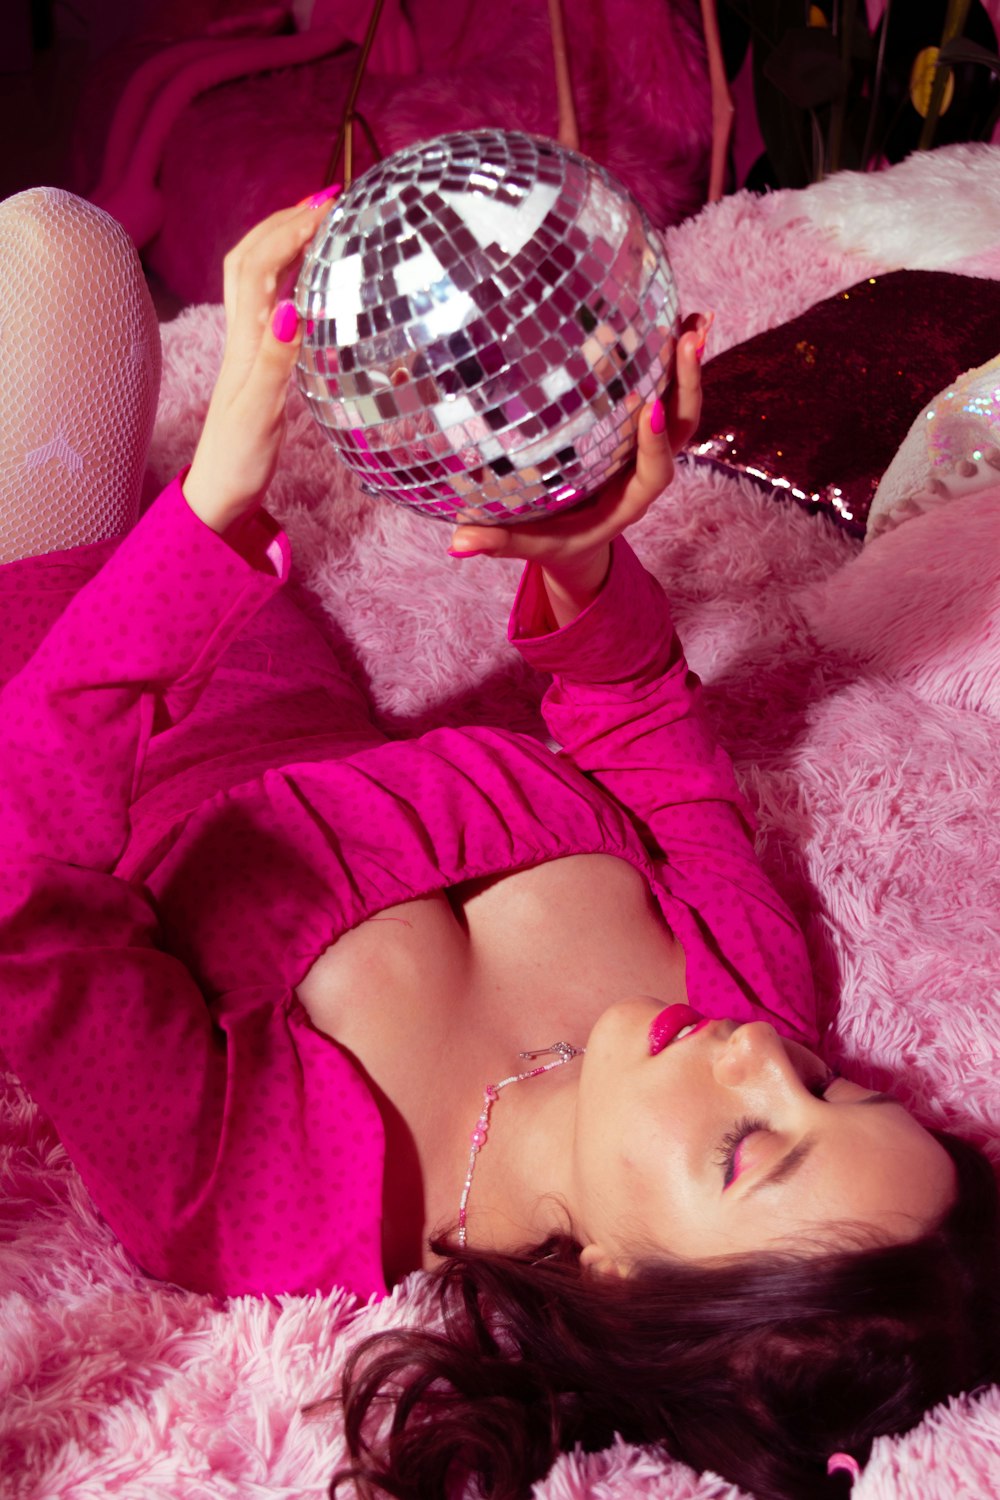 a woman in a pink dress is holding a disco ball